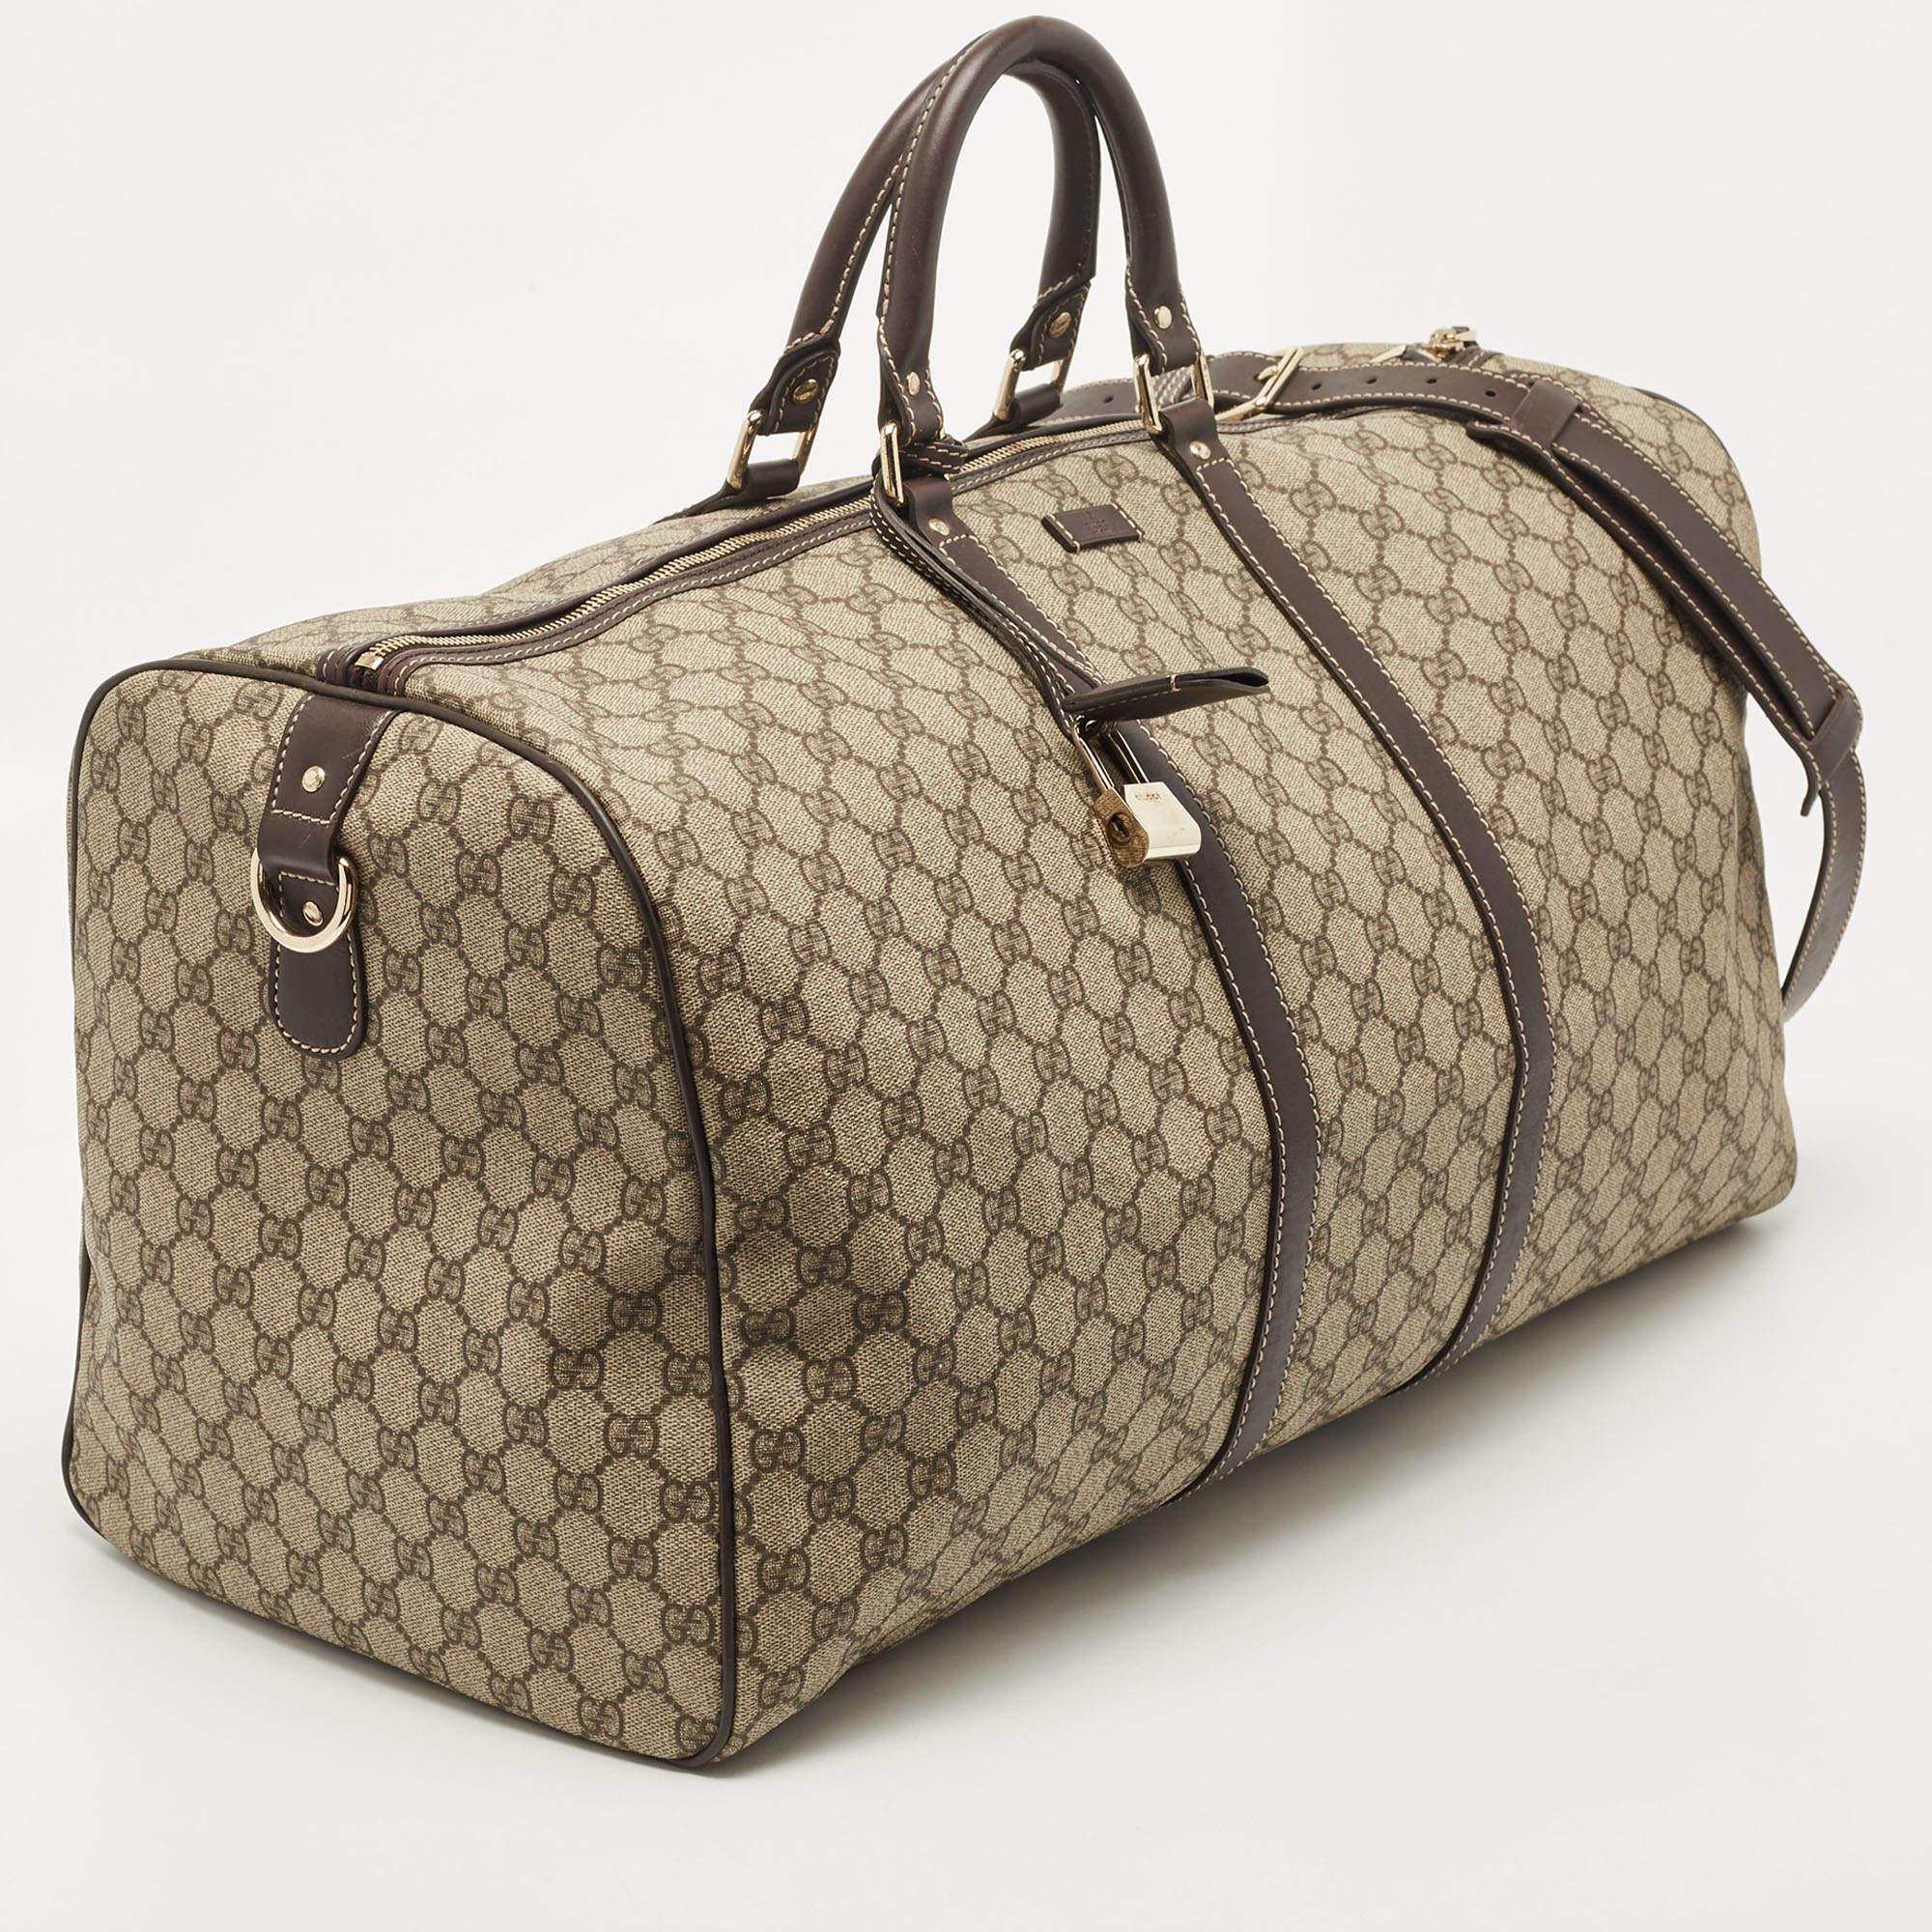 Women's Gucci Beige/Brown GG Supreme Canvas and Leather Carry On Duffel Bag